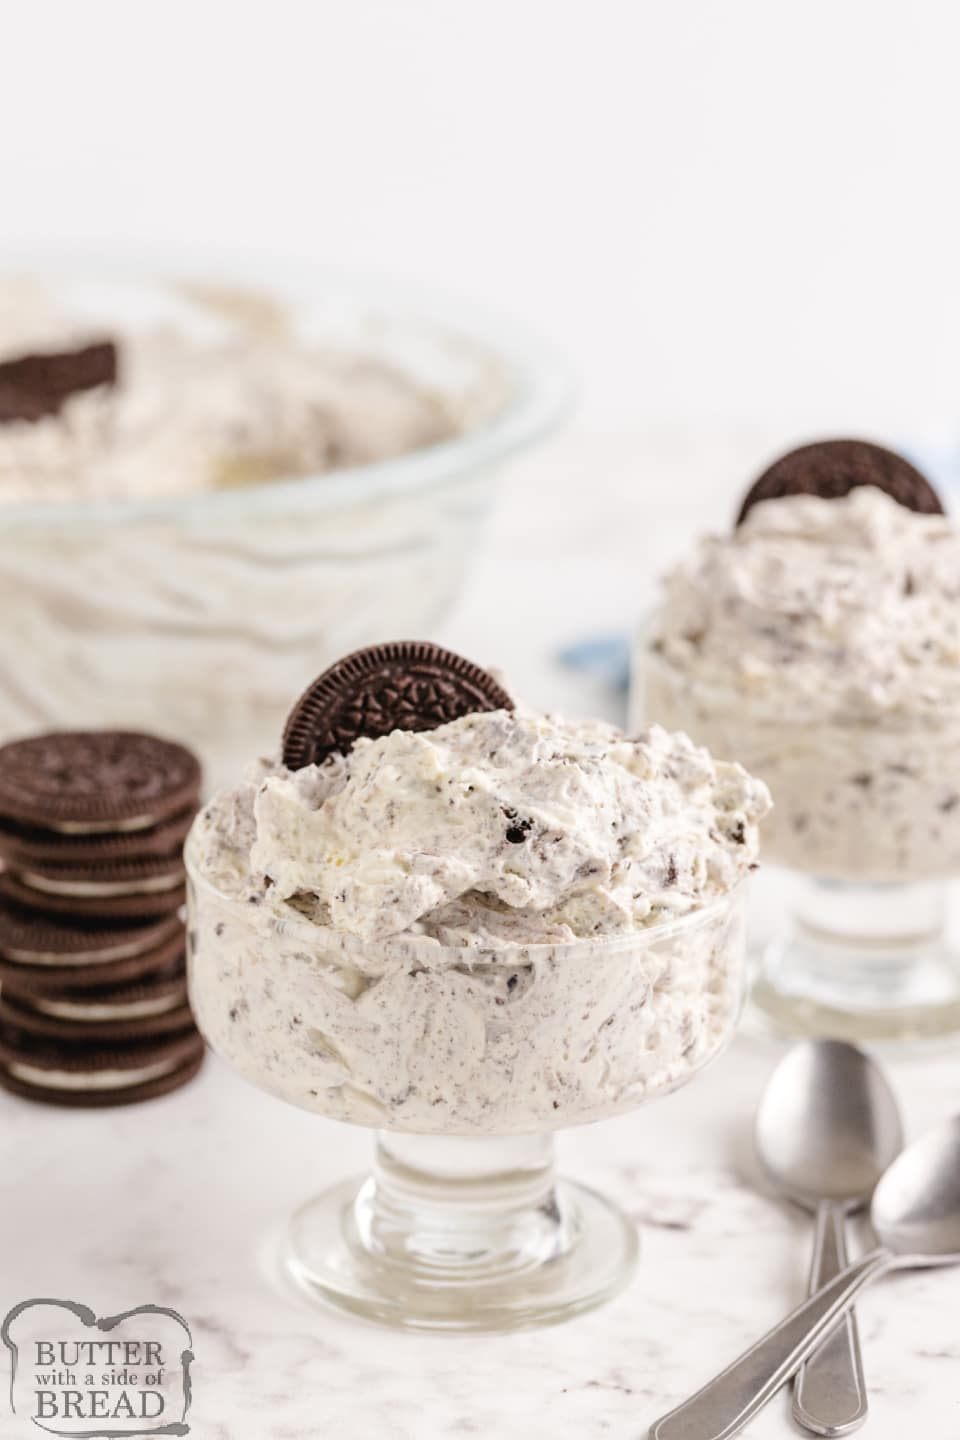 Cookies and Cream Salad made with Oreos and pudding for a delicious dessert or side dish that everyone loves! Only 4 ingredients and about 5 minutes to make. 